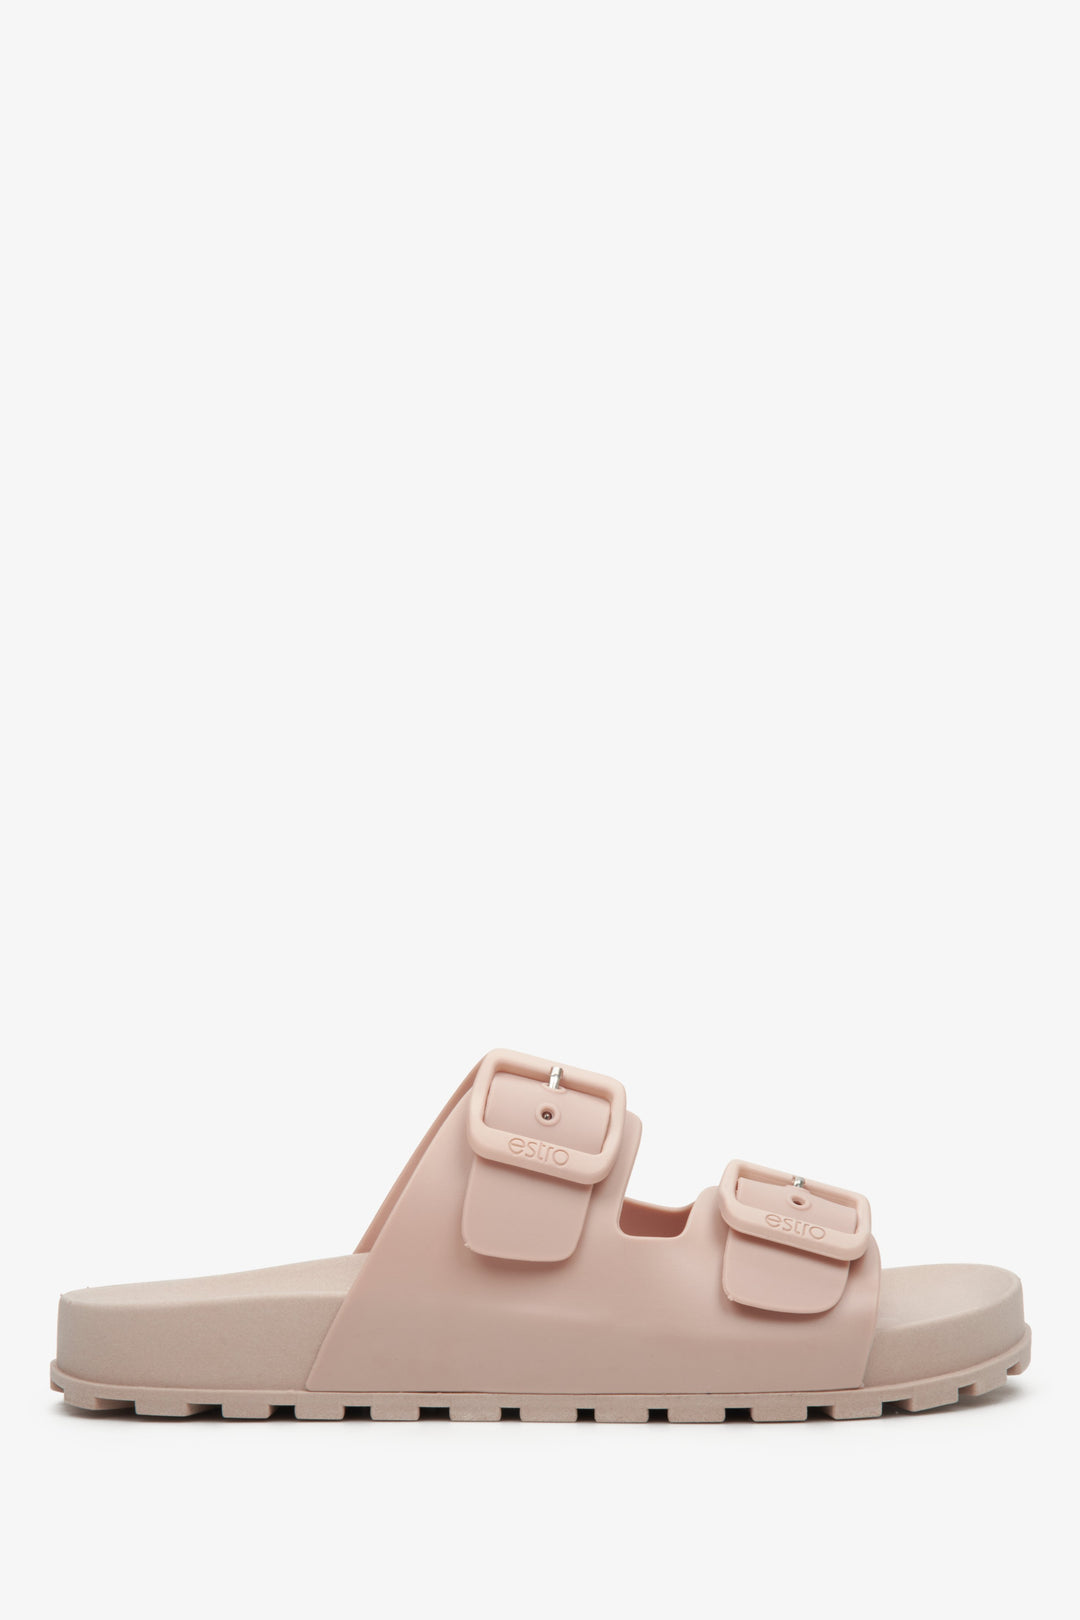 Light pink Women's Sandals with Thick Straps Estro ER00112403.